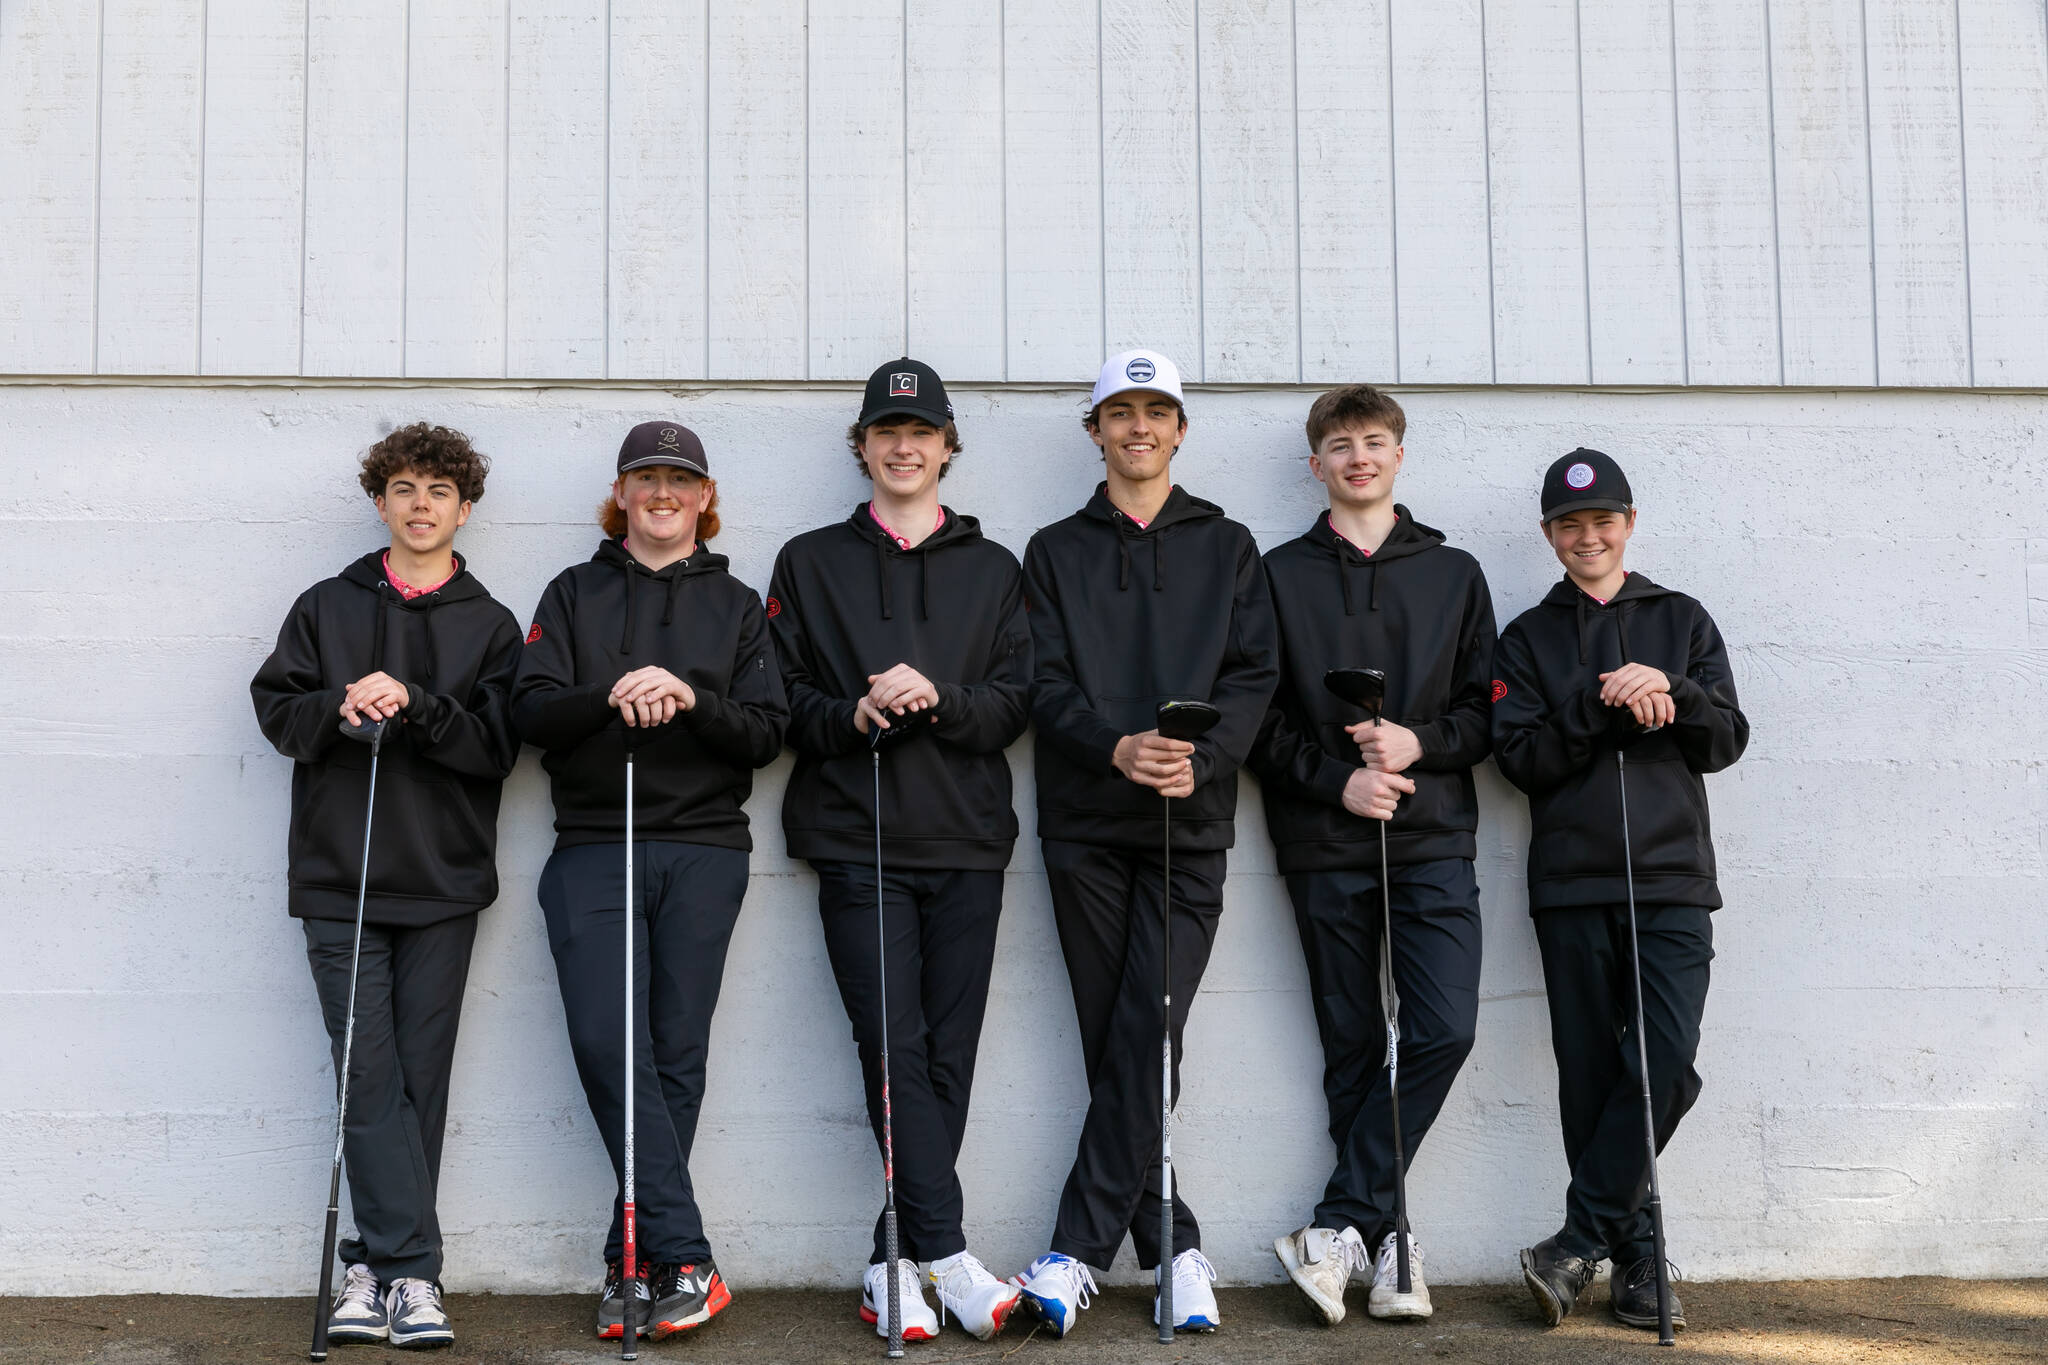 The members of the Snohomish High School boys golf team (from left to right): Cade Strickland, Tyson Olds, Palmer Mutcheson, Hudson Capelli, Drew Hanson and Jackson Dammann. (Photo courtesy of Mark Myers Photography)